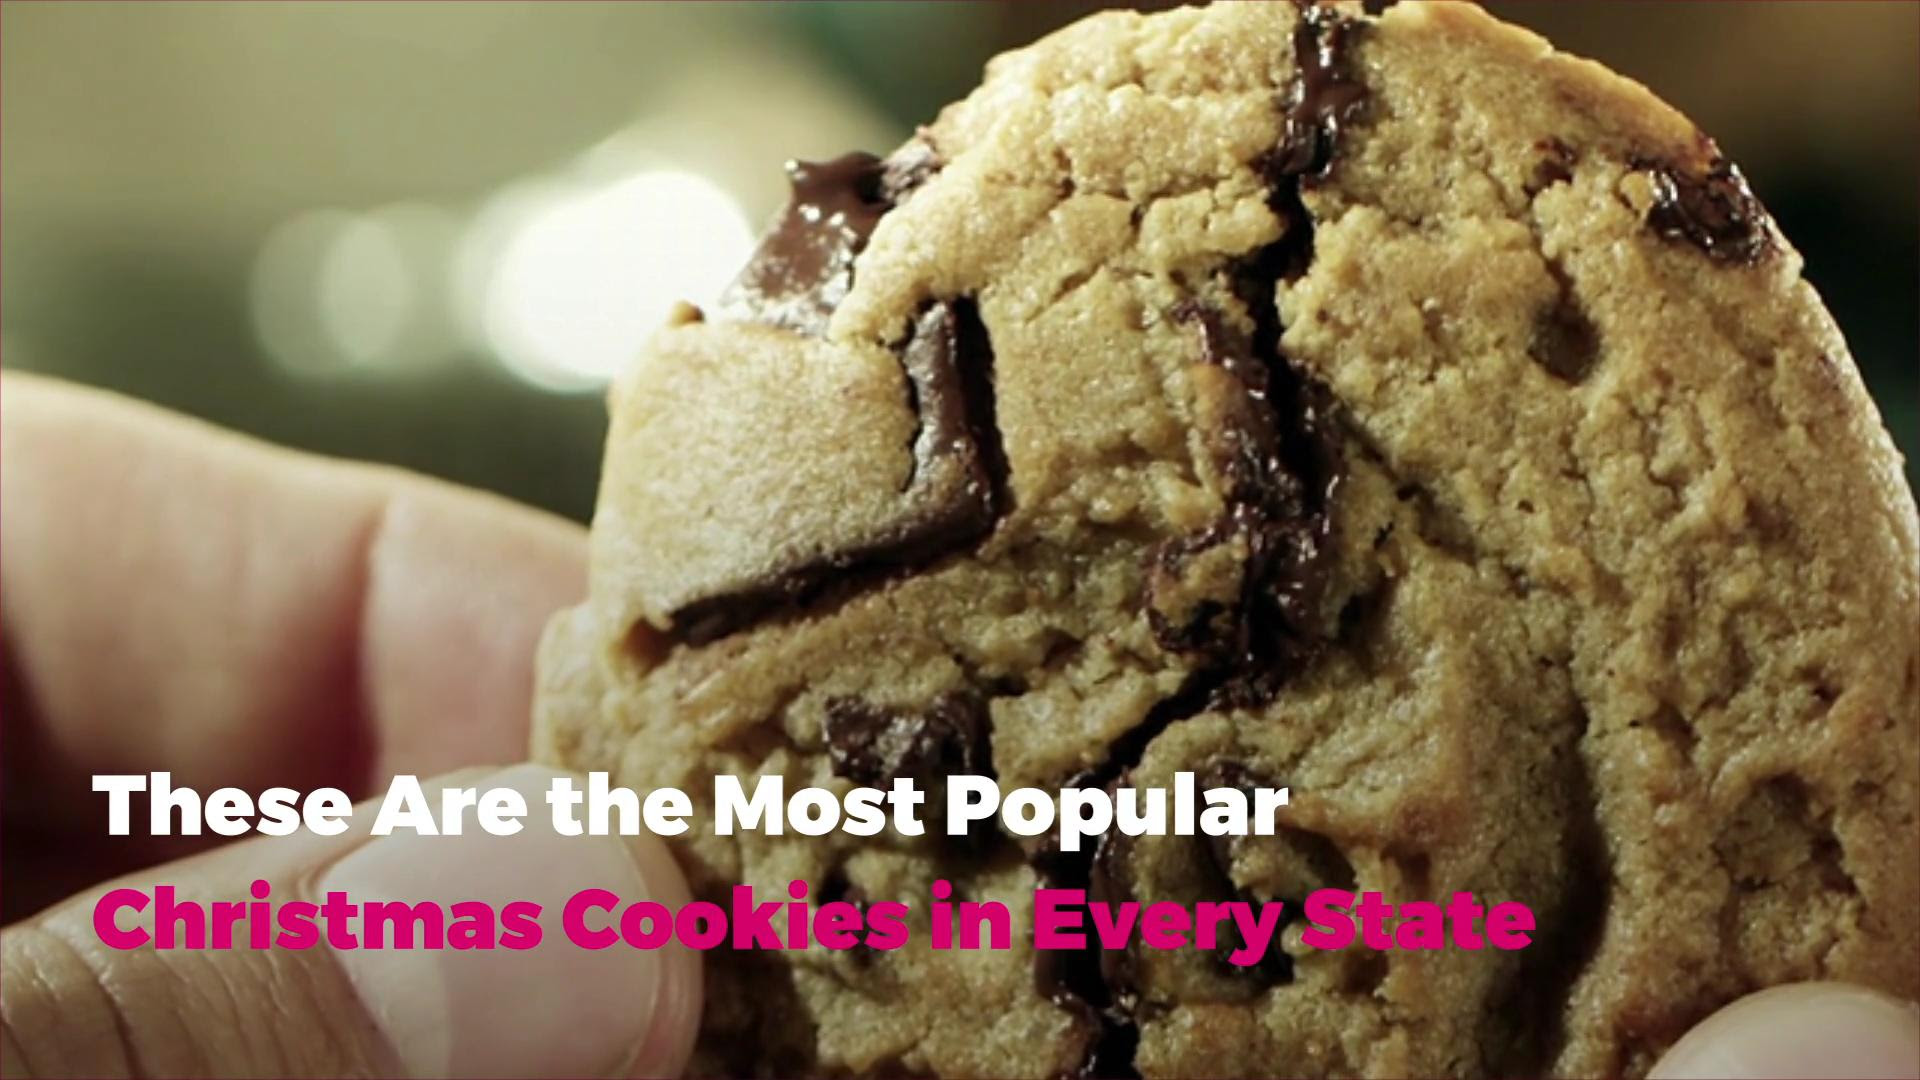 Ohio, for example, was the only. The Most Popular Christmas Cookies In America Real Simple